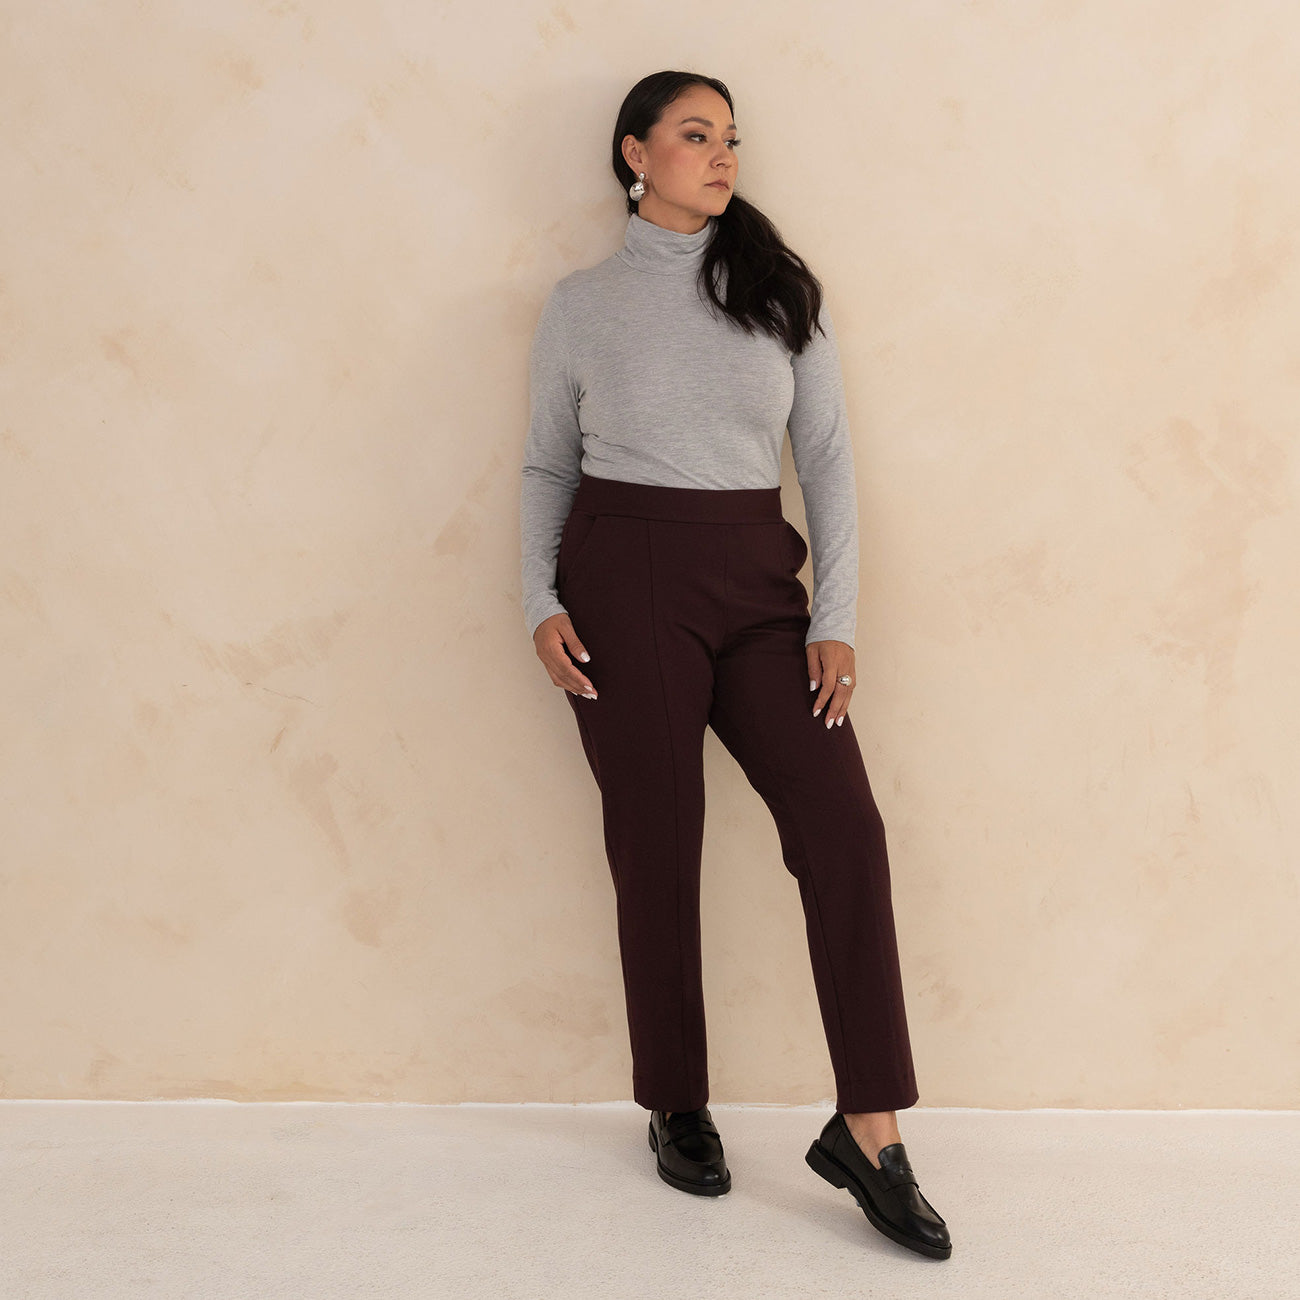 woman wearing light grey turtleneck and aubergine high waisted tailored pants with black loafers